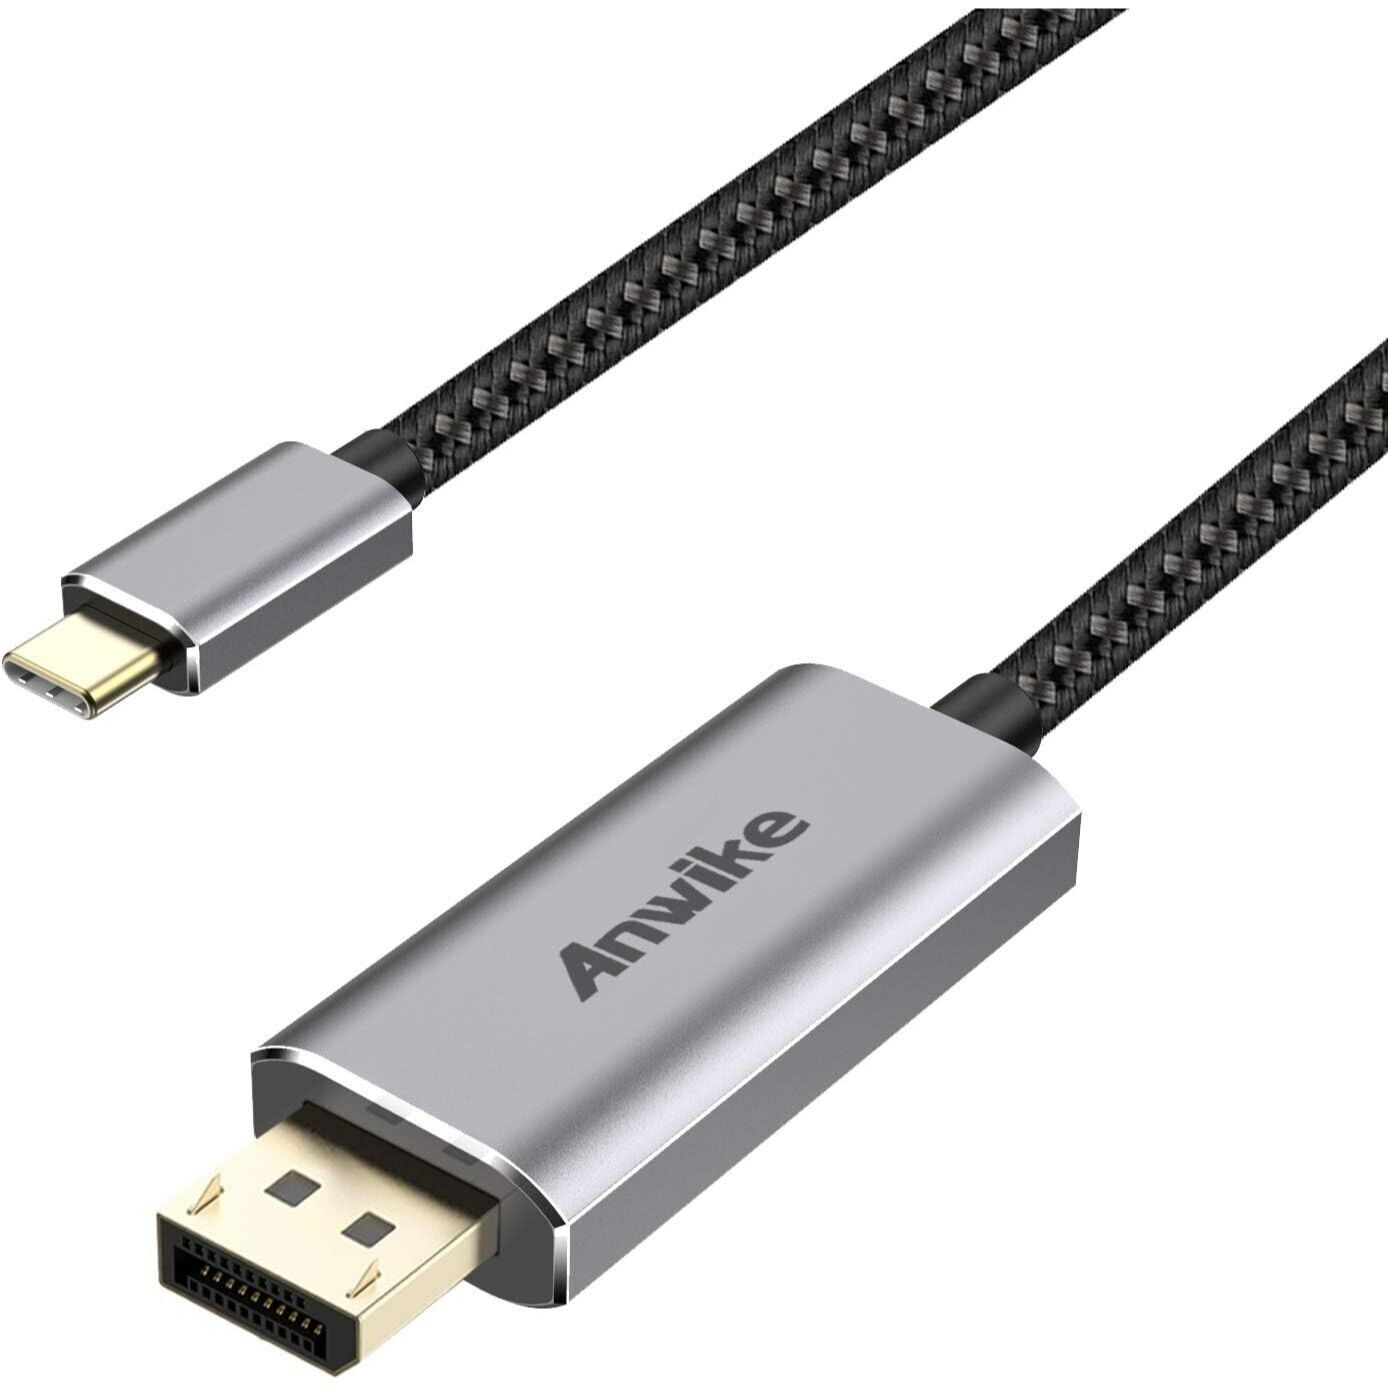 USB C to DisplayPort Cable 4K(6ft), USB 3.1 Type C Thunderbolt 3 Compatible